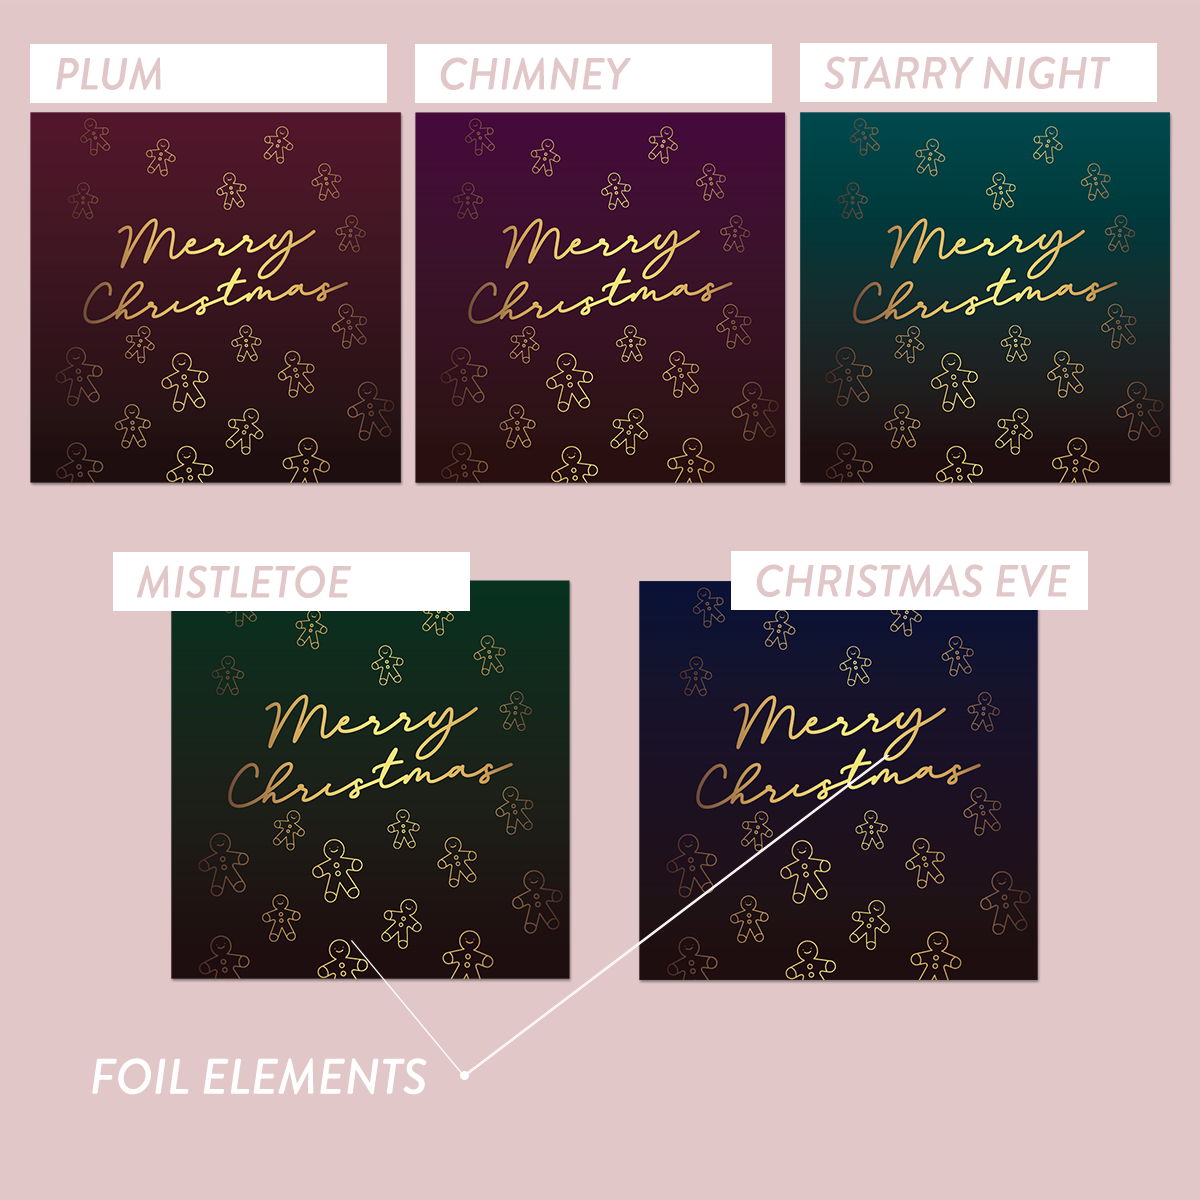 Foiled The Jewel Christmas Collection Square Labels - GINGERBREAD MEN - Mystic